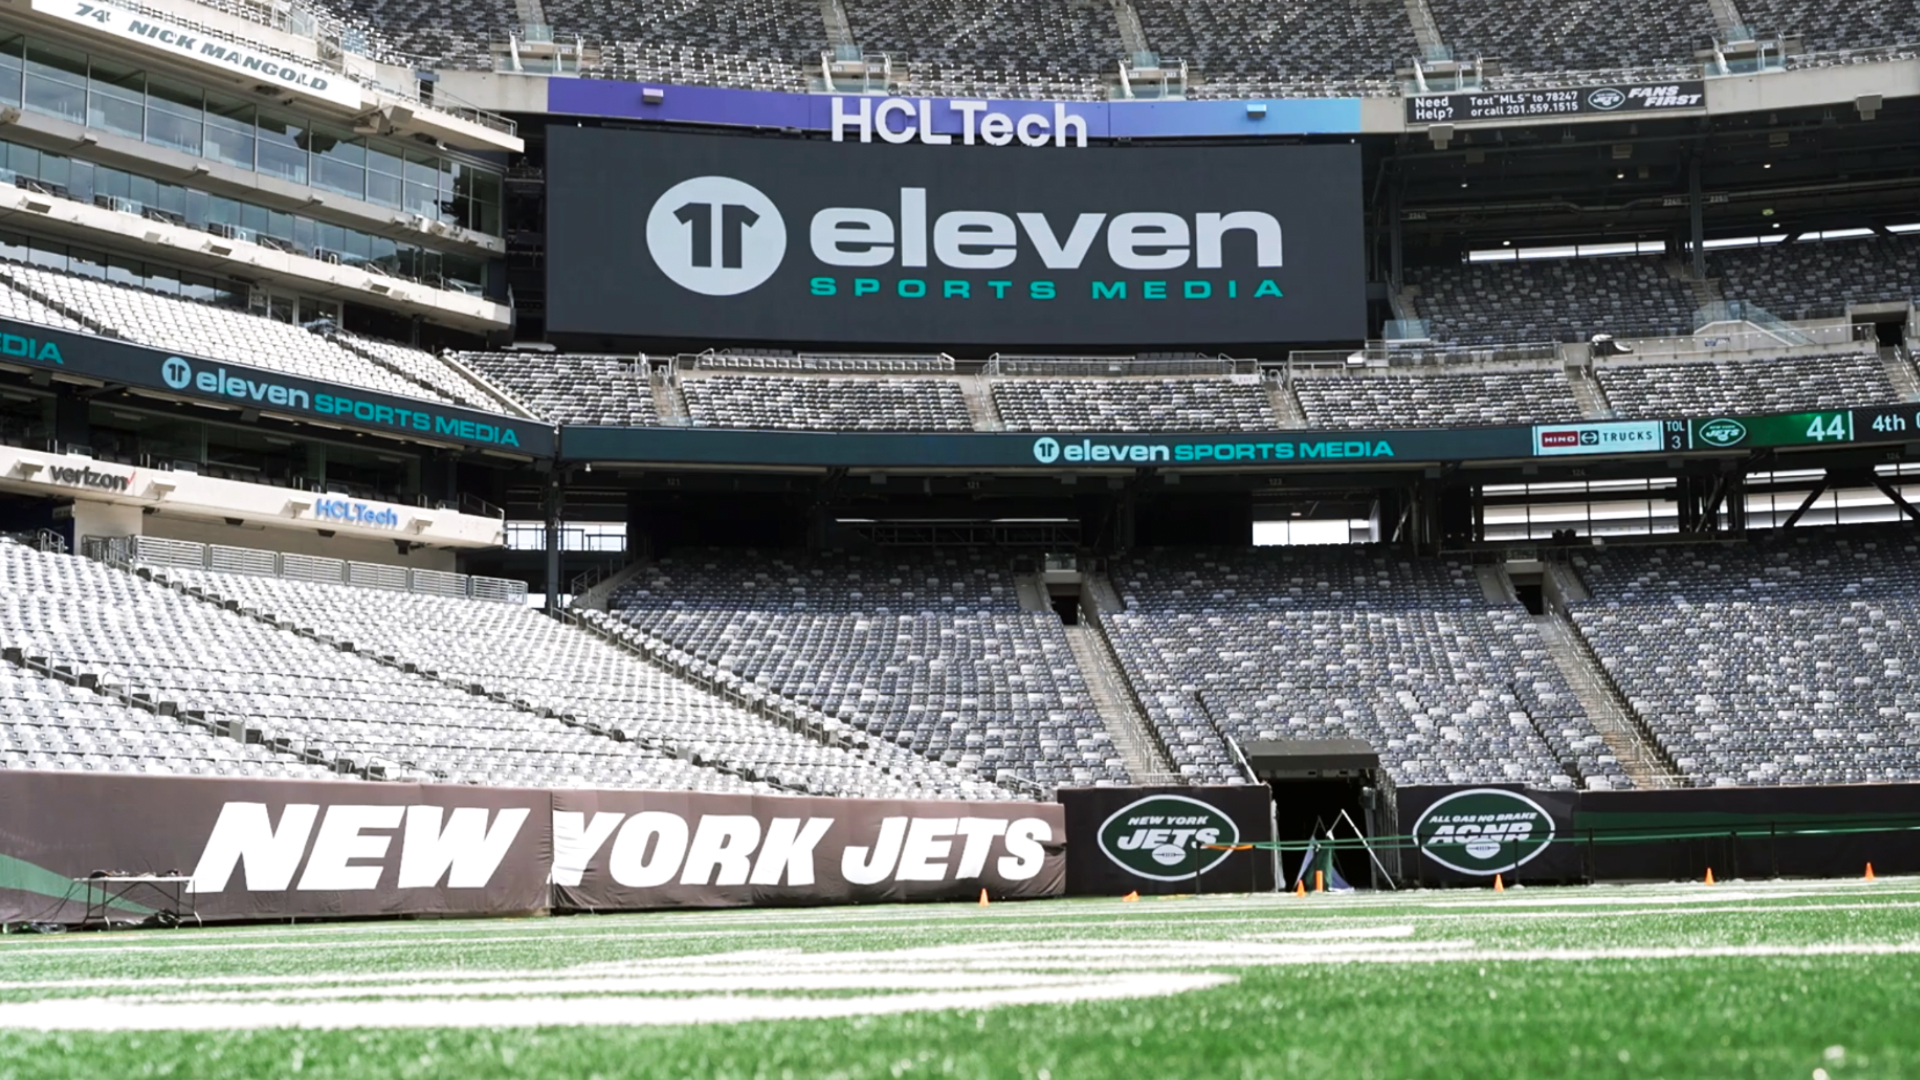 NEW YORK JETS AND ELEVEN SPORTS MEDIA PARTNERSHIP STRENGTHENS TIES WITH   SMALL BUSINESS COMMUNITY